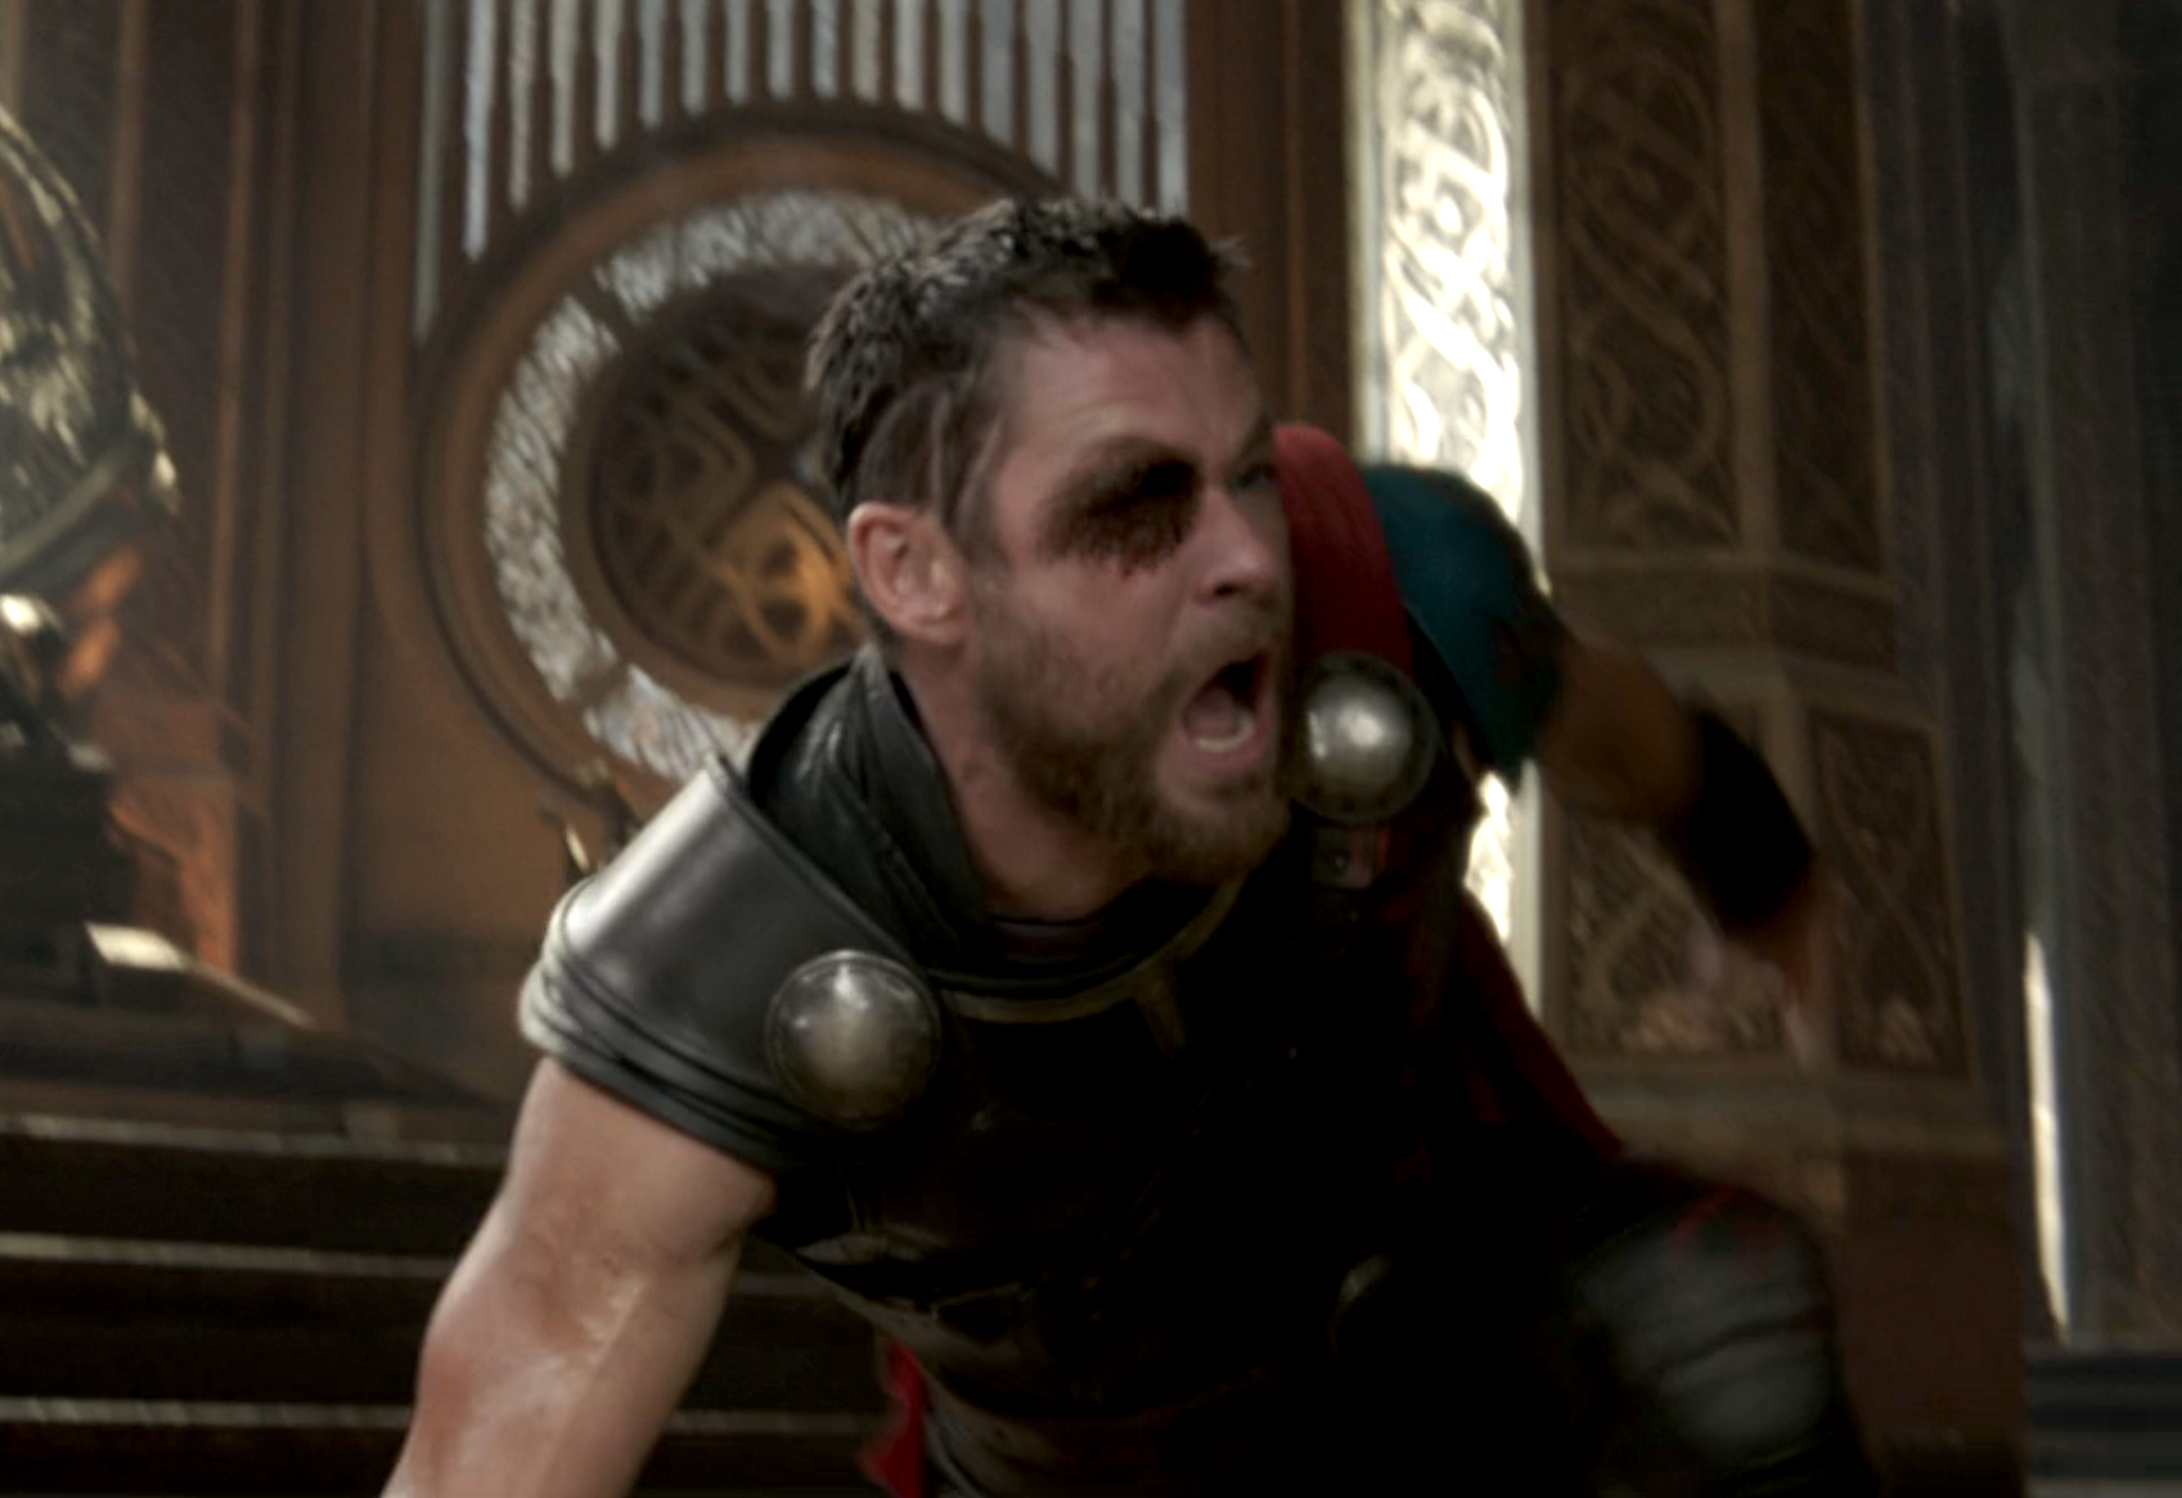 Thor screaming after he lost his eye